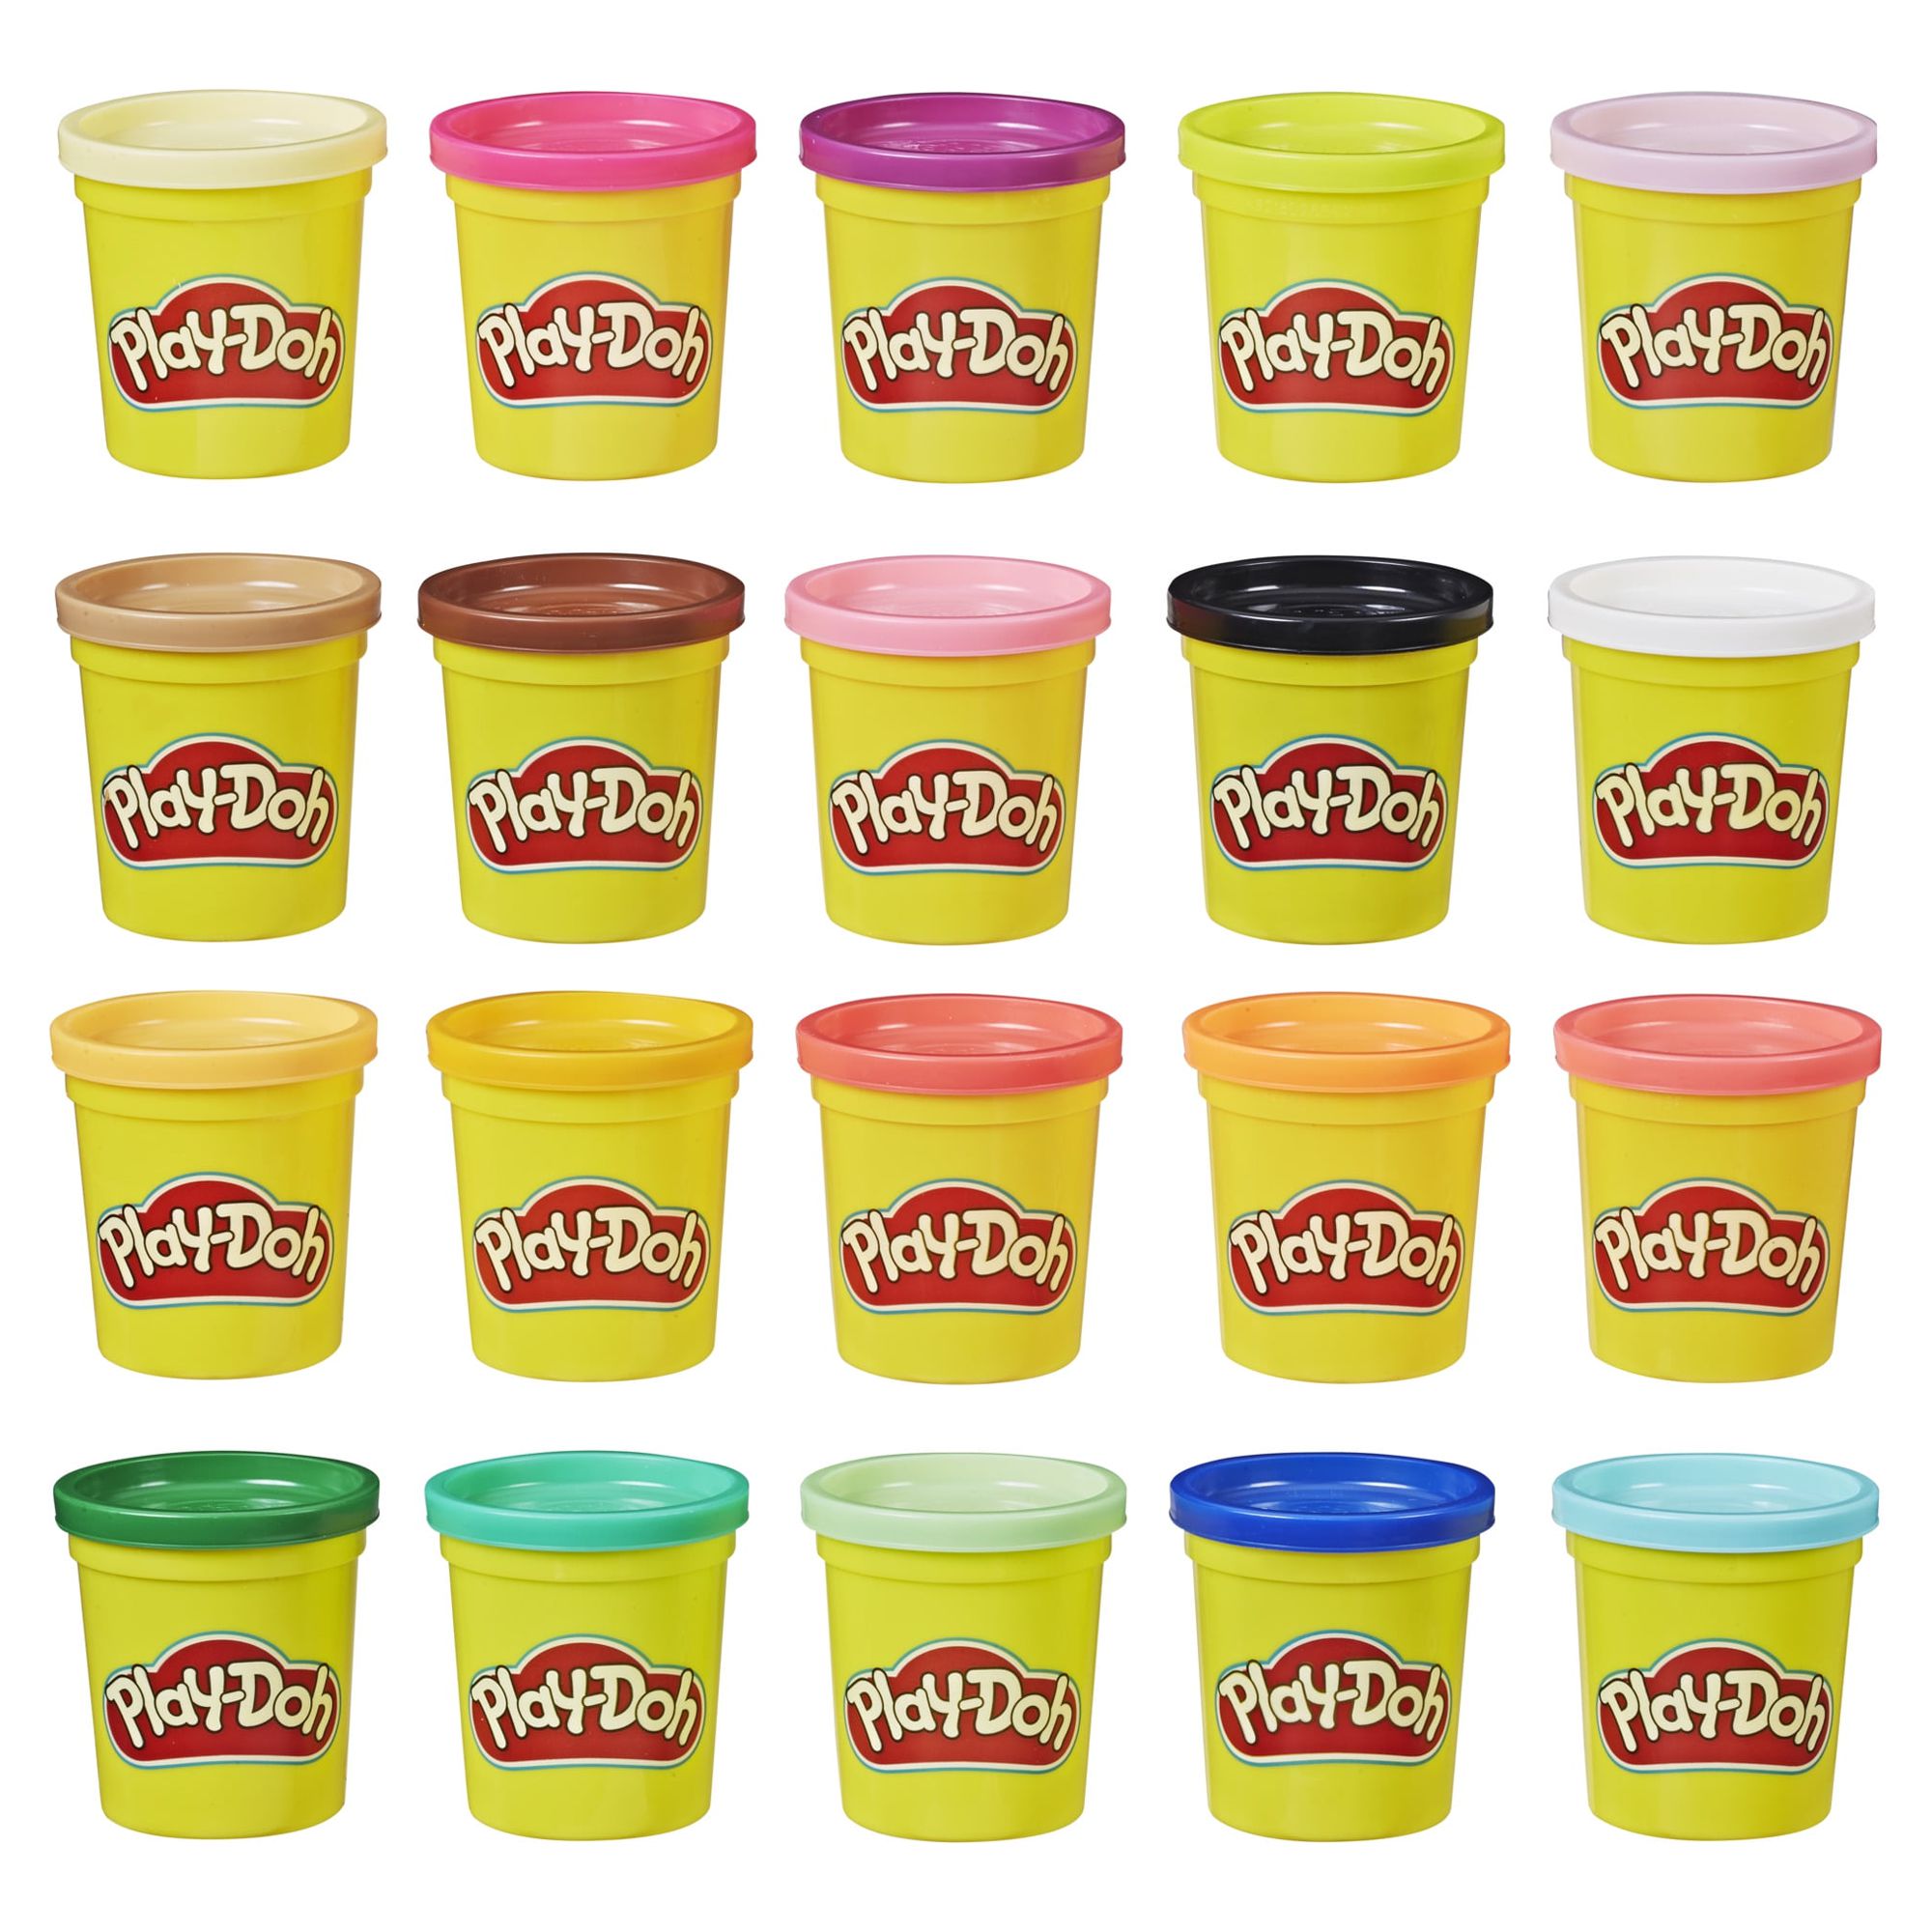 Play-Doh Super Color 20-Pack of 3-Ounce Cans, Kids Toys, Arts and Crafts for Kids - image 2 of 4